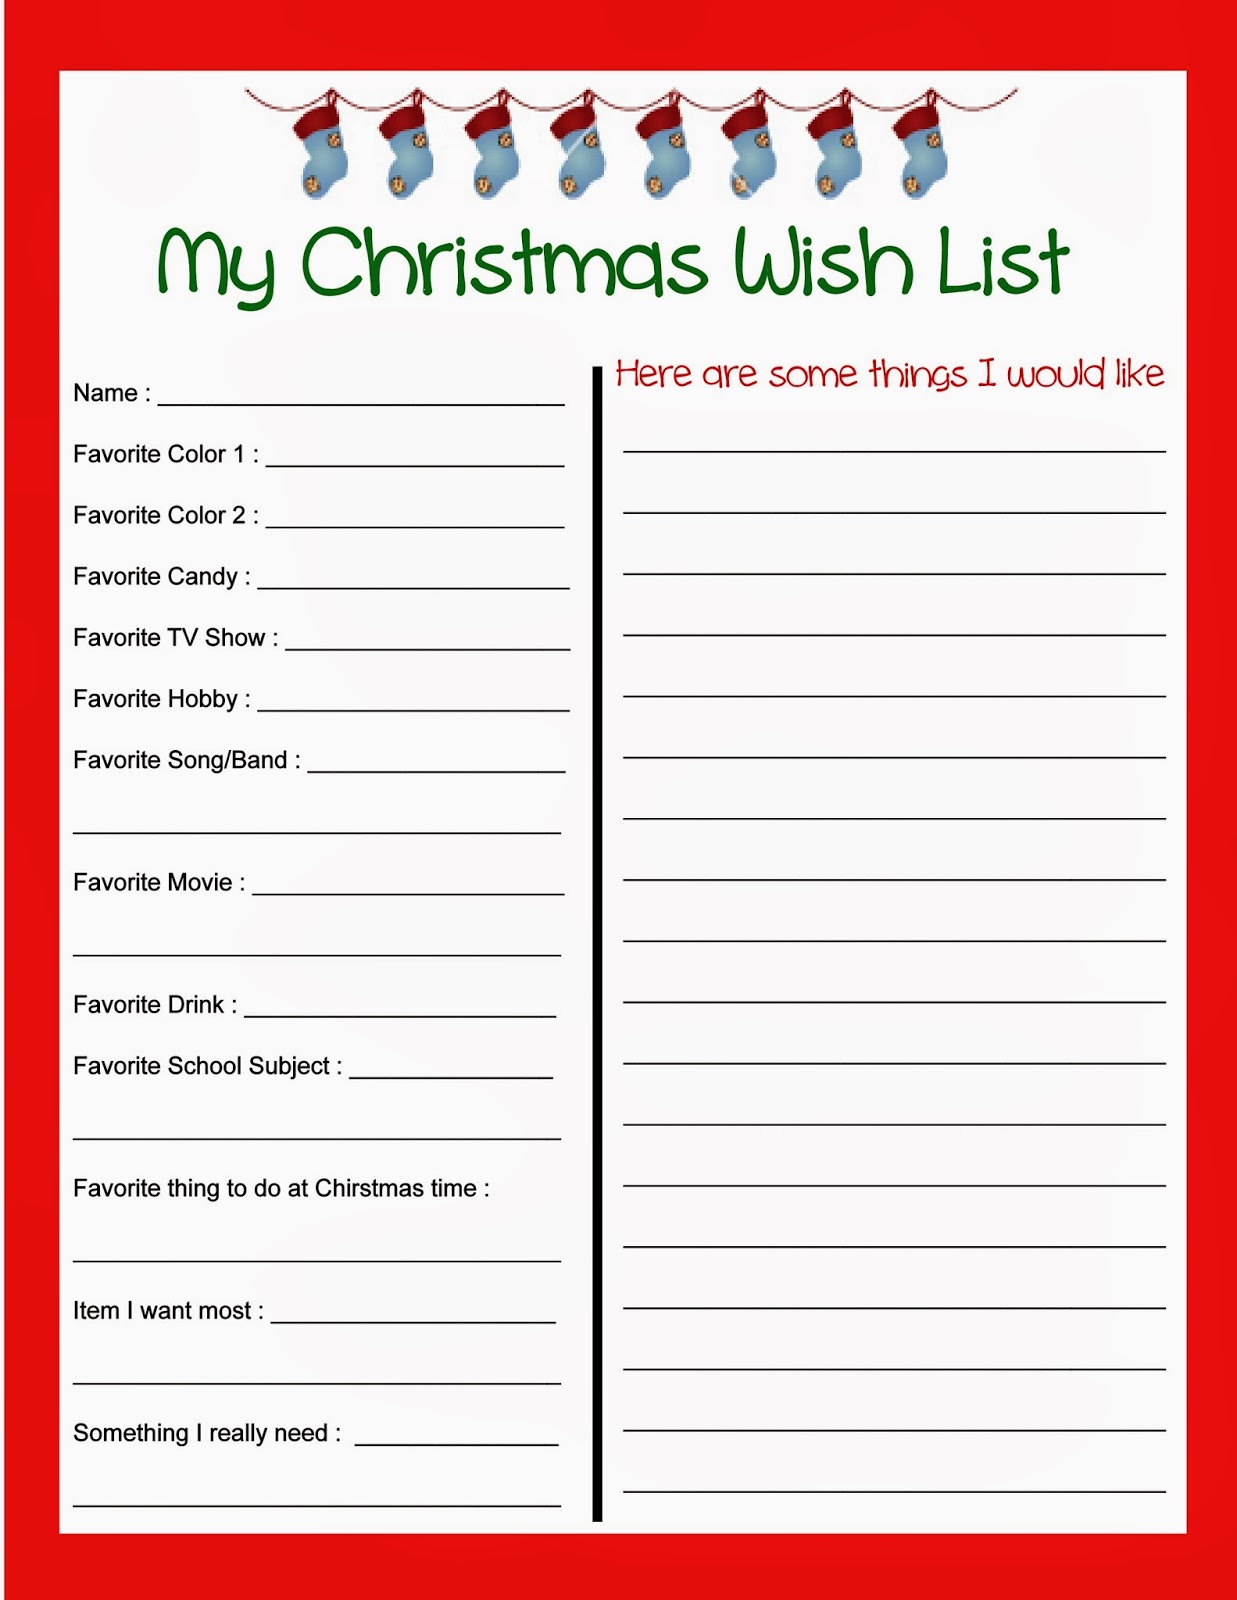 stout-stop-christmas-wish-list-and-kids-letter-to-santa